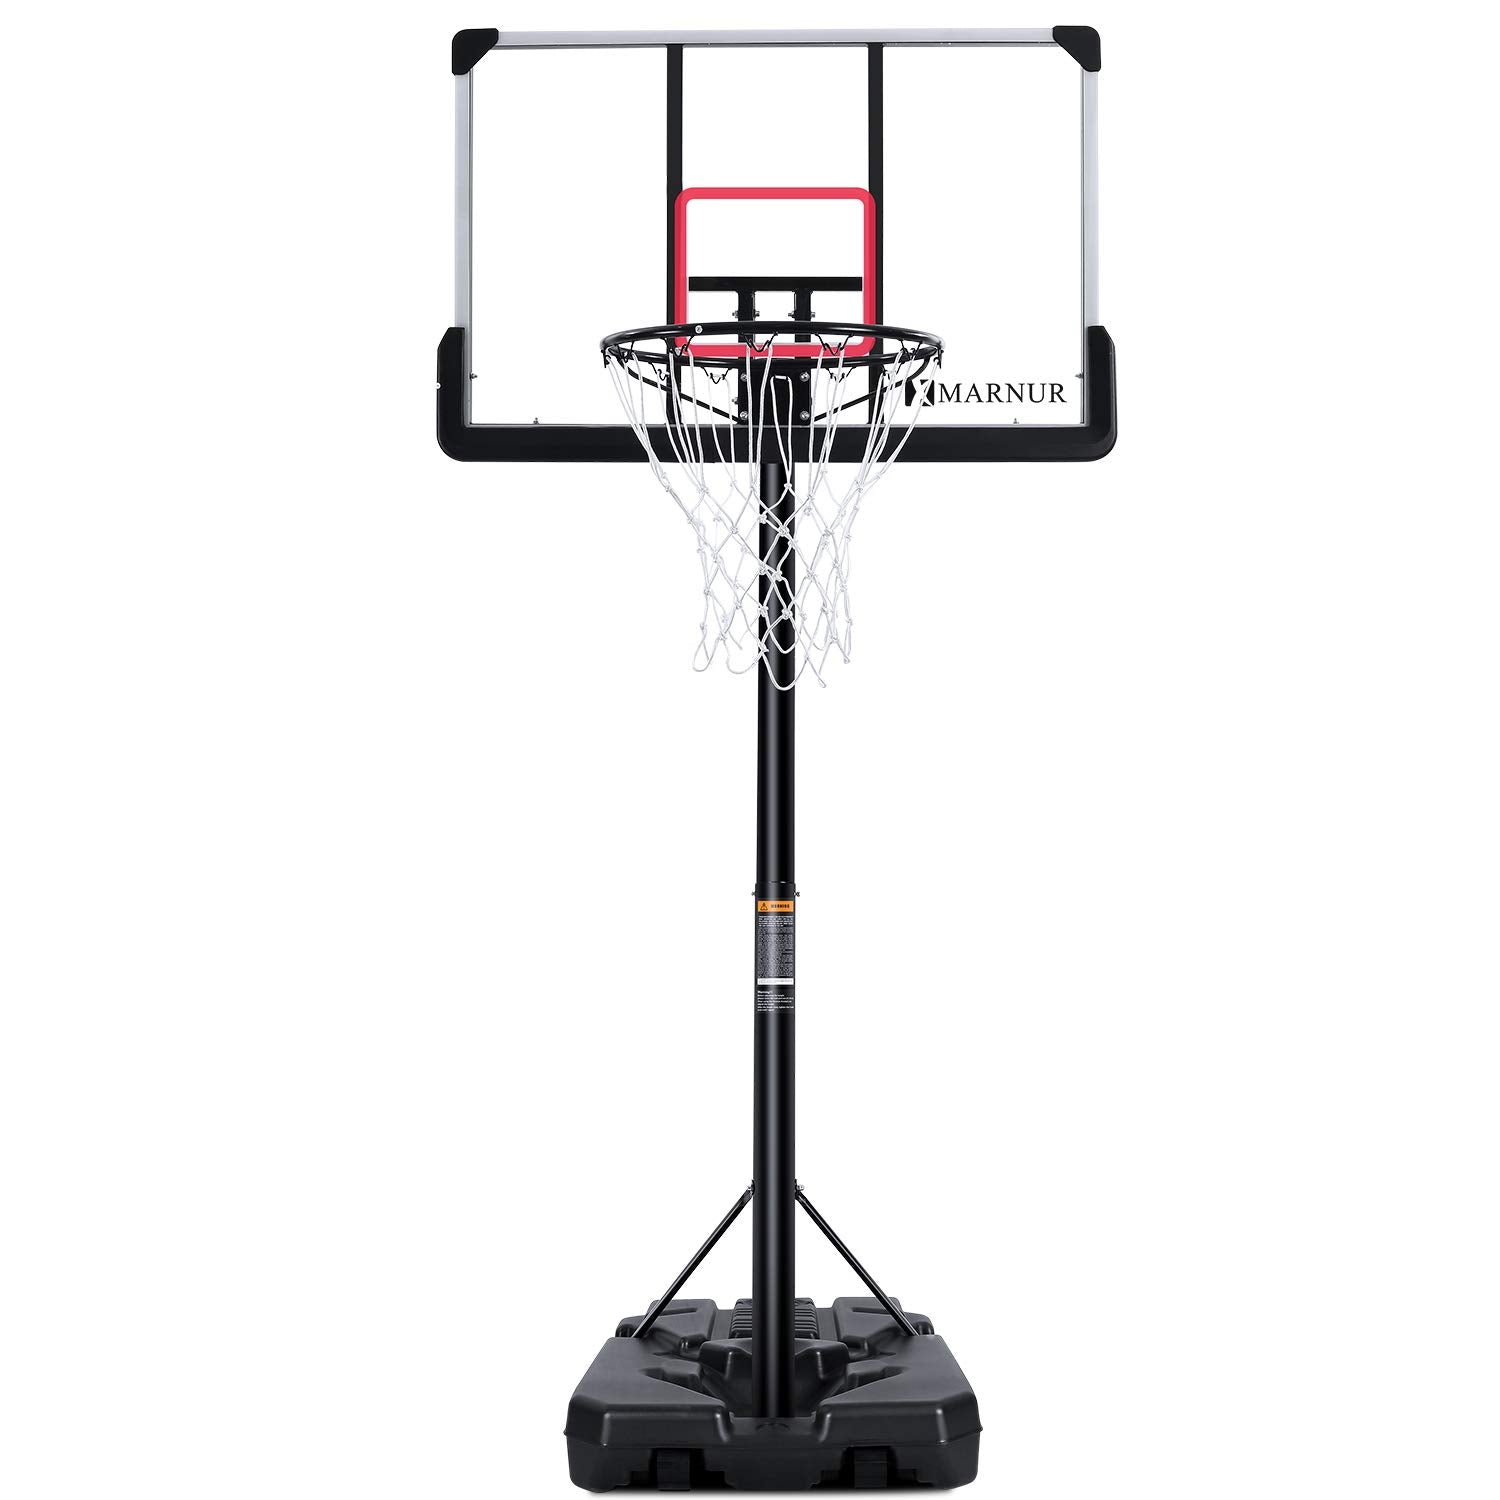 Load image into Gallery viewer, 44inch Basketball Hoop Basketball System, 6 ft 7 in to 10 ft Height Adjustable Portable Basketball Goal Basketball Equipment with Big Backboard &amp; Wheels and Large Base
